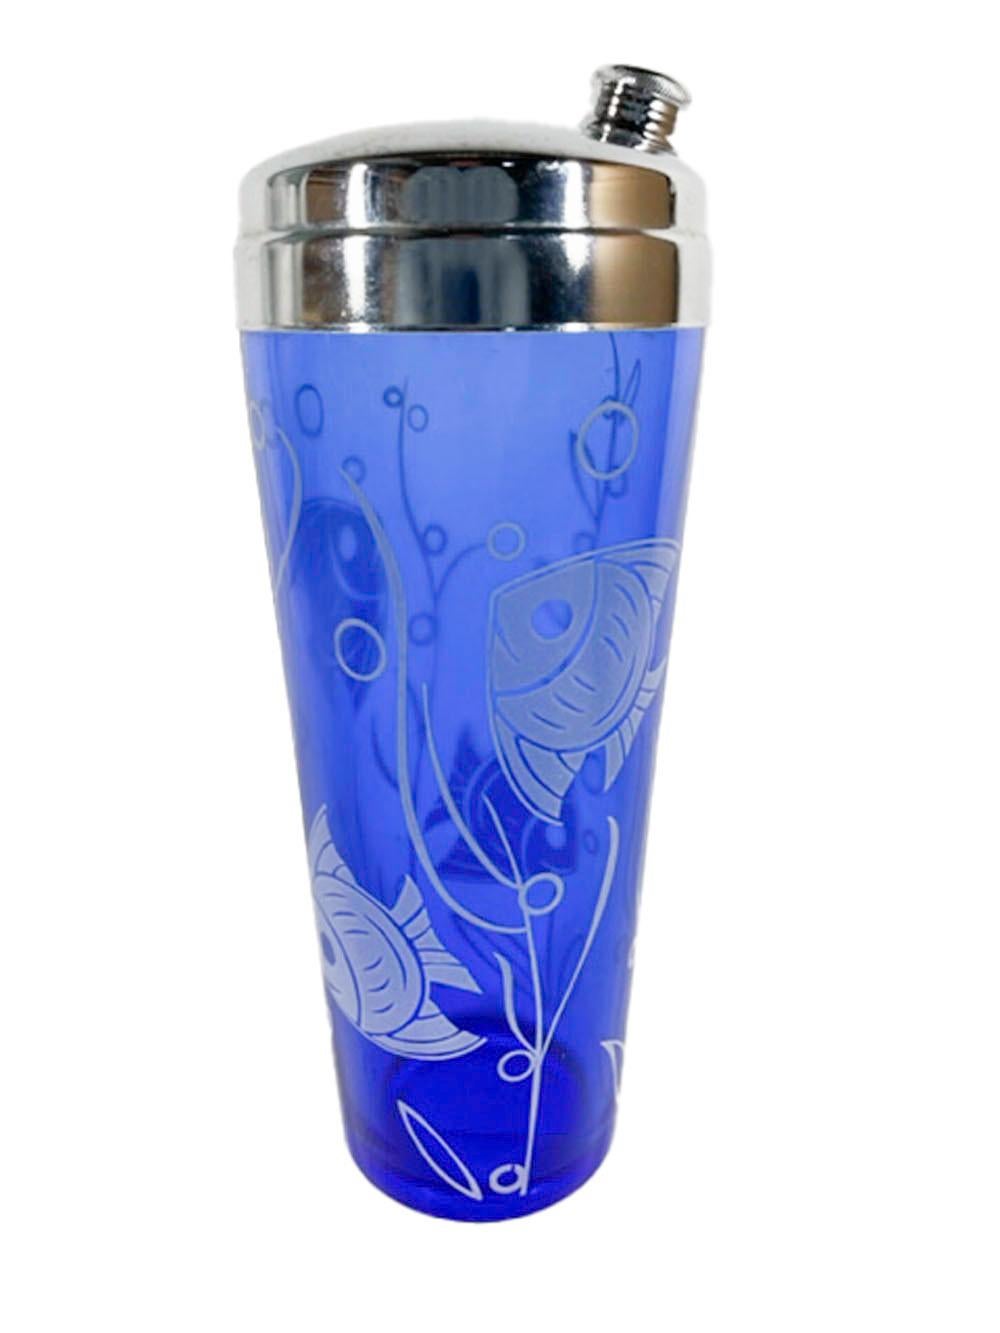 Art Deco, chrome lidded cobalt blue, cocktail shaker and four cocktail glasses with white tropical fish, bubbles and seaweed.
Shaker: 9